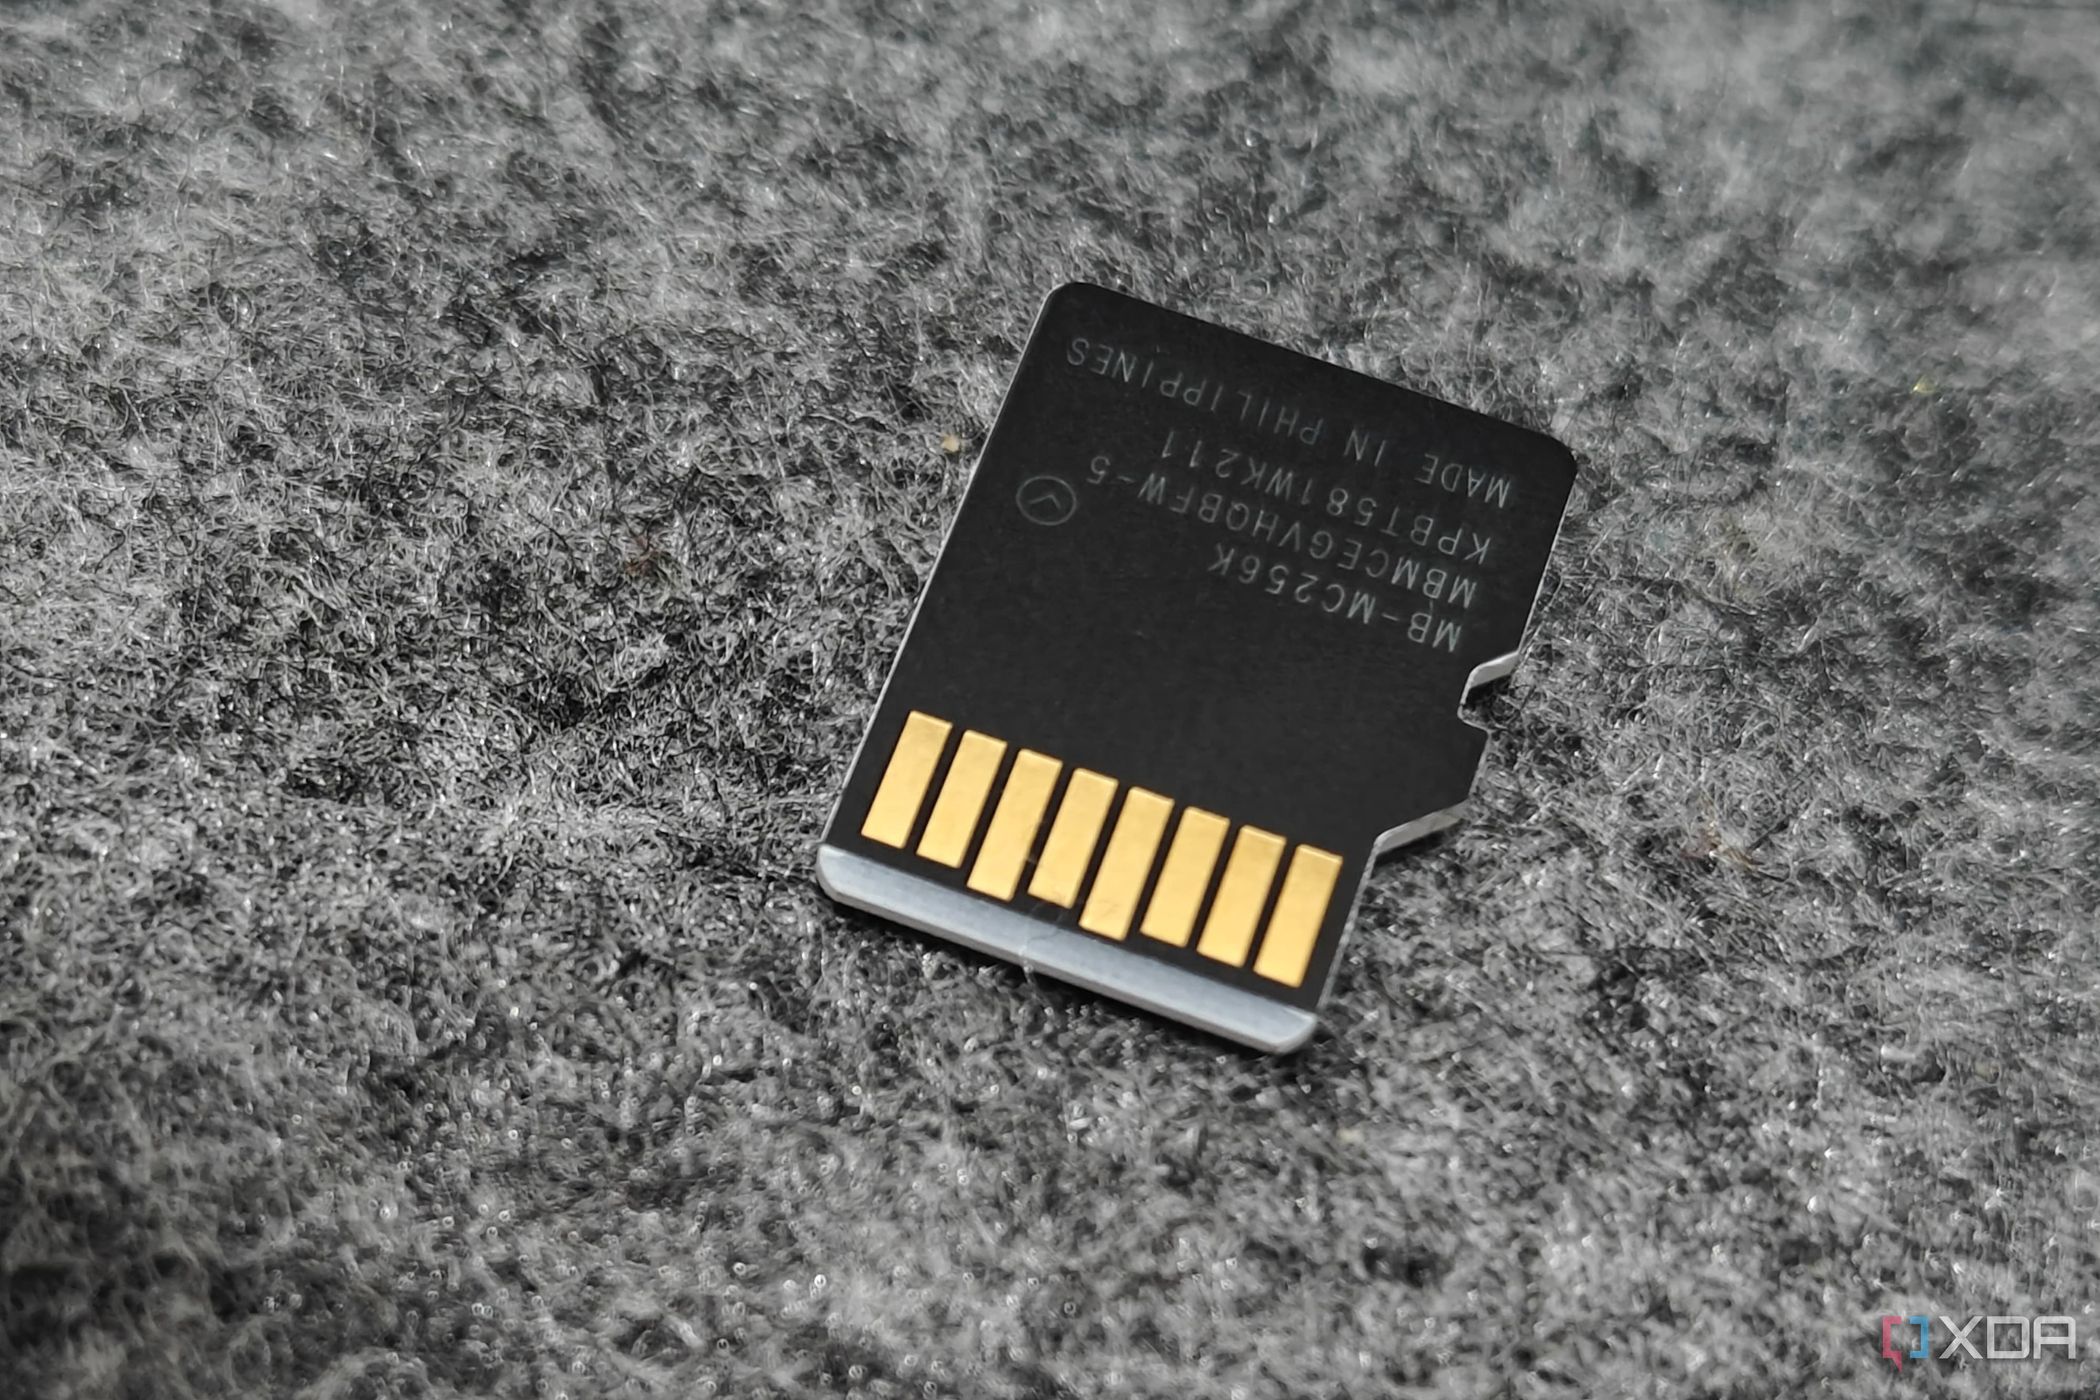 An image showing the back side of a microsd card kept on a felt deskmat.